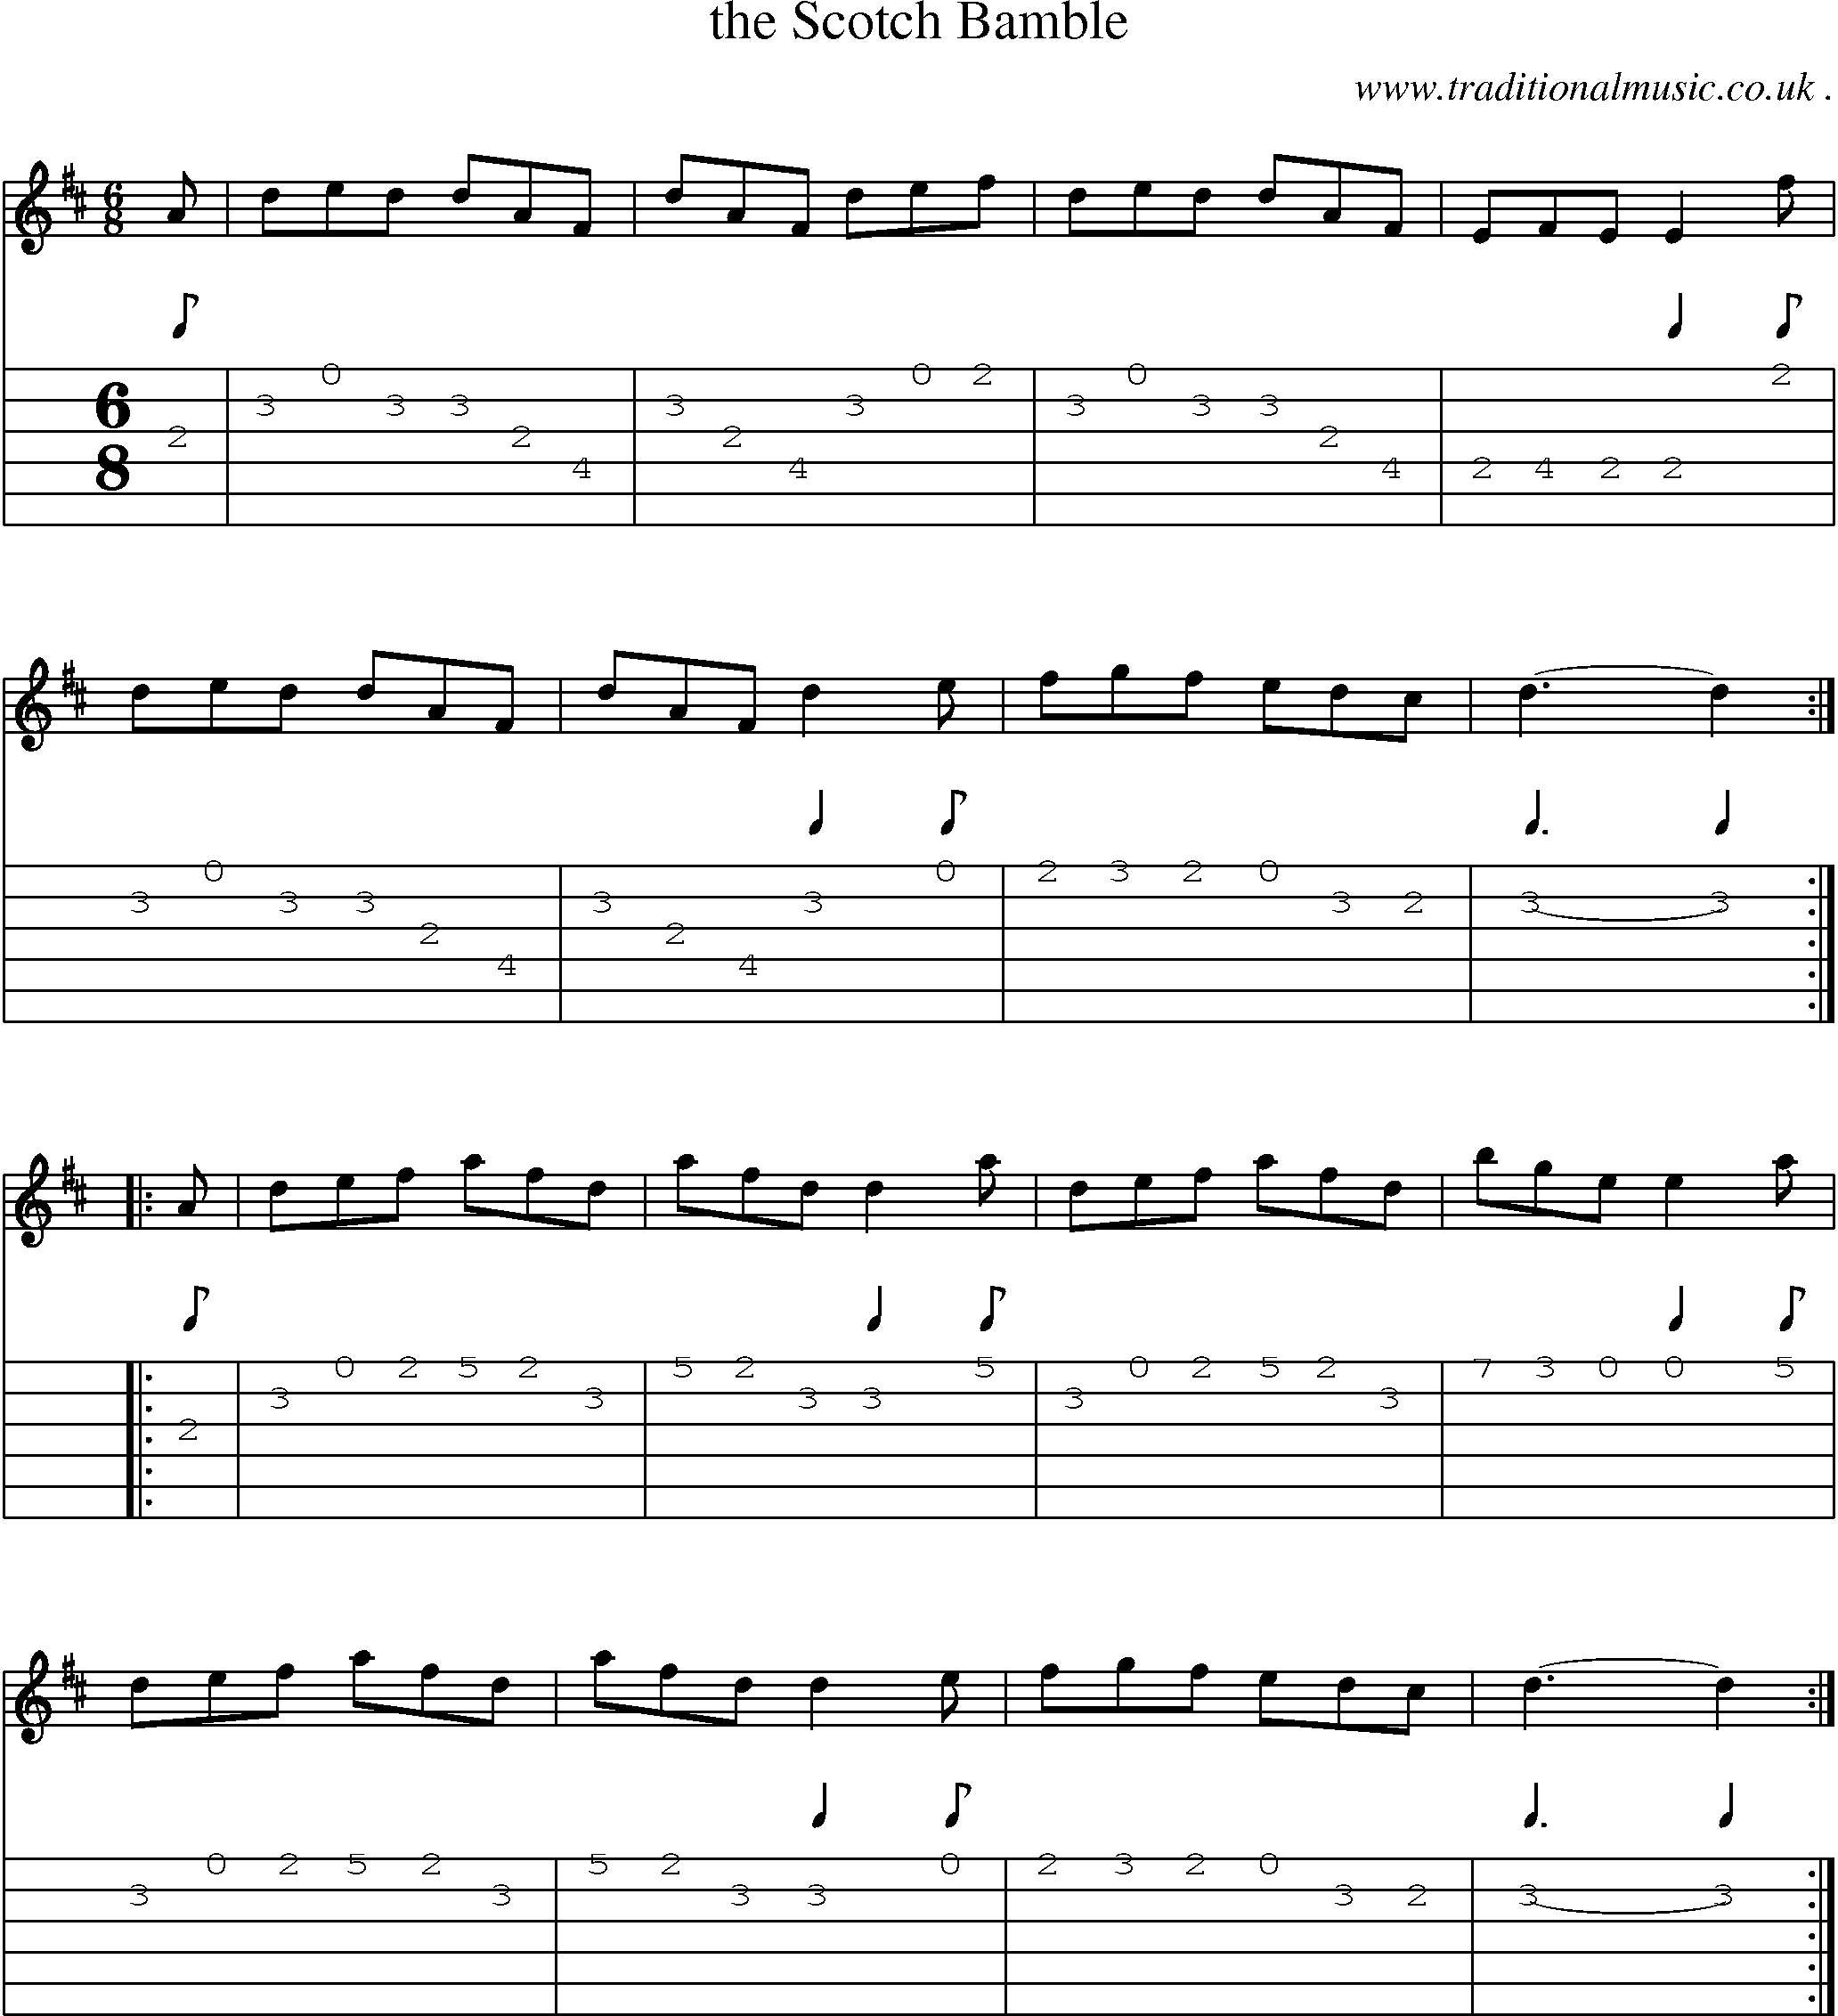 Sheet-Music and Guitar Tabs for The Scotch Bamble